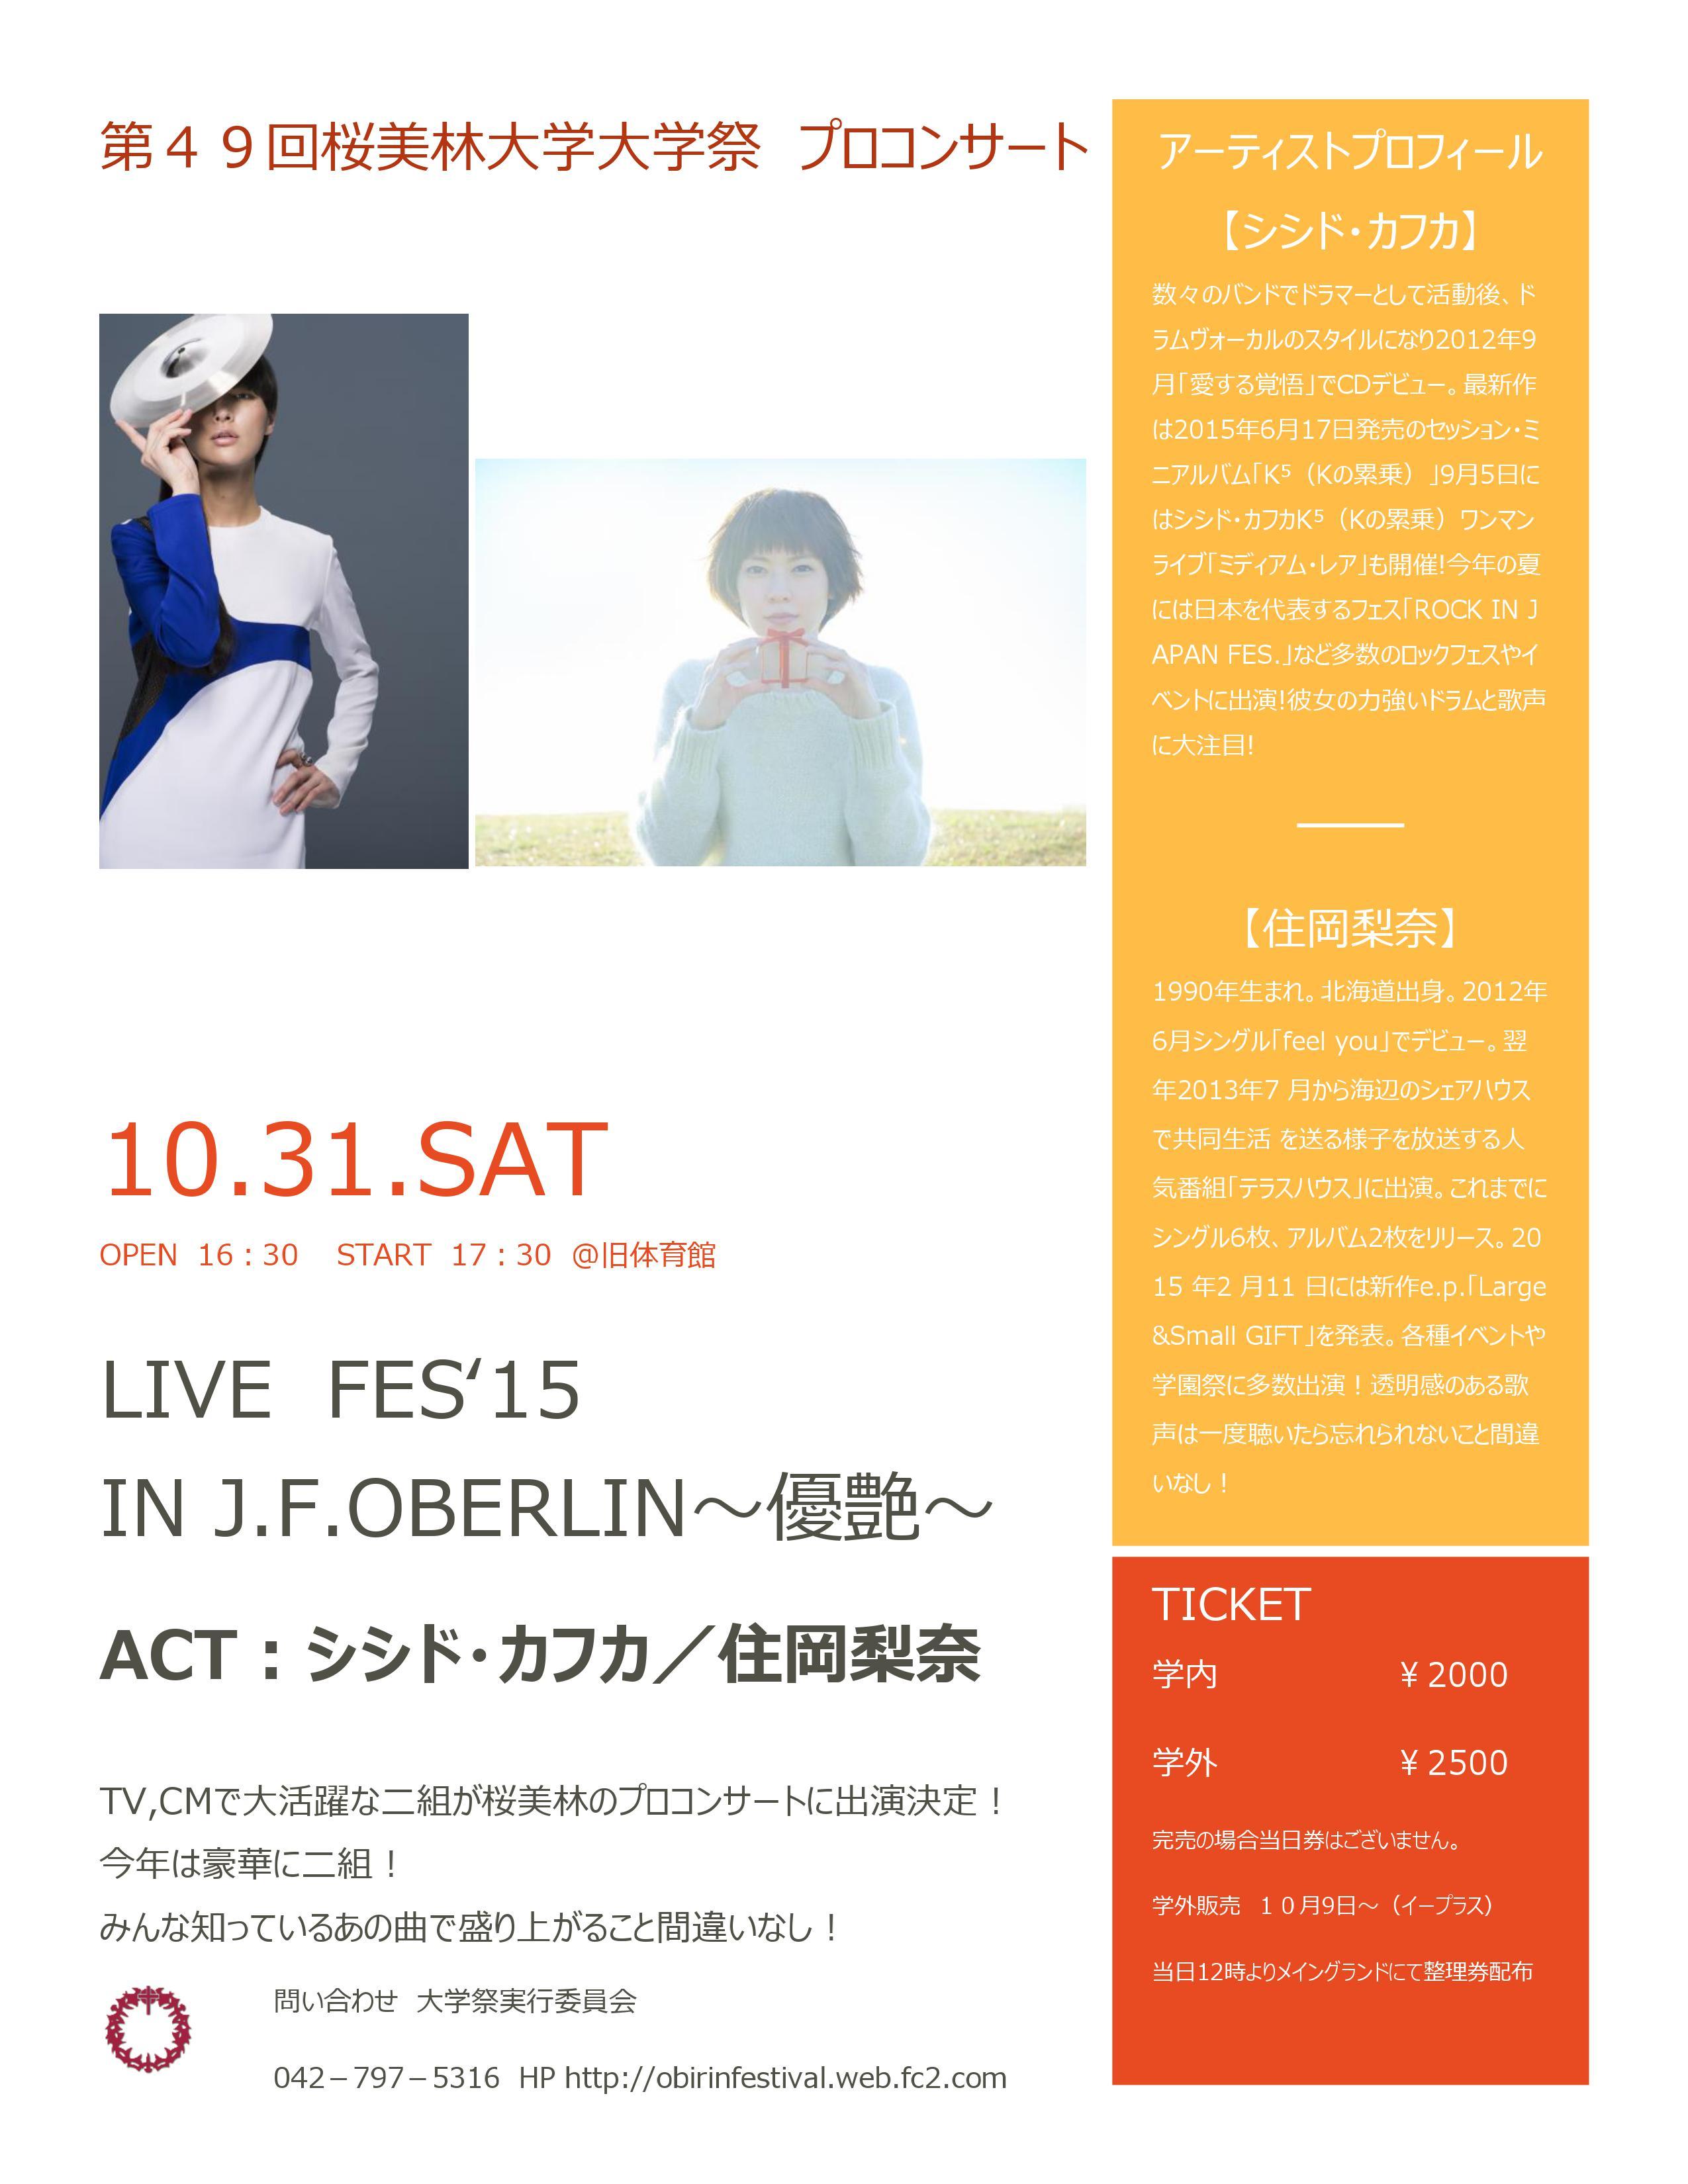 LIVE FES'15 IN J.F.OBERLIN～優艶～フライヤー